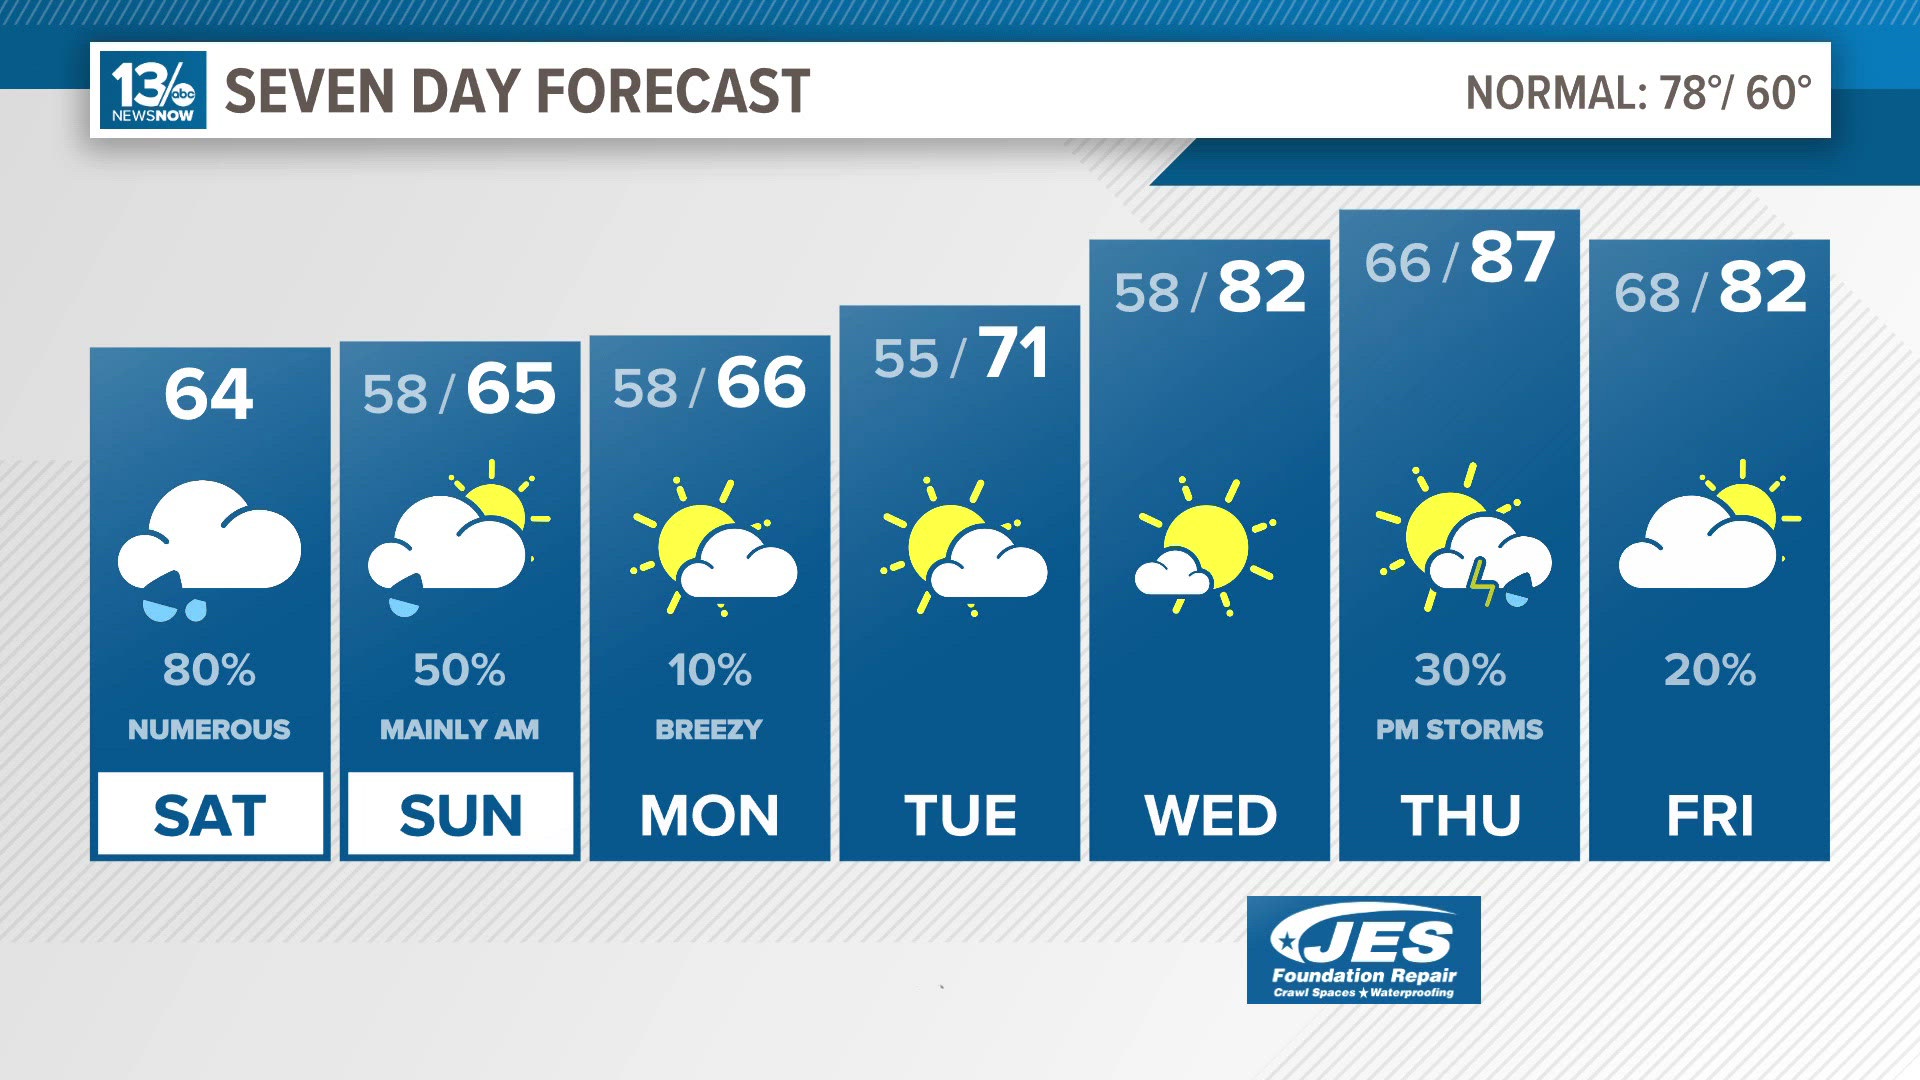 Temperatures will likely remain in the 60s through Monday.